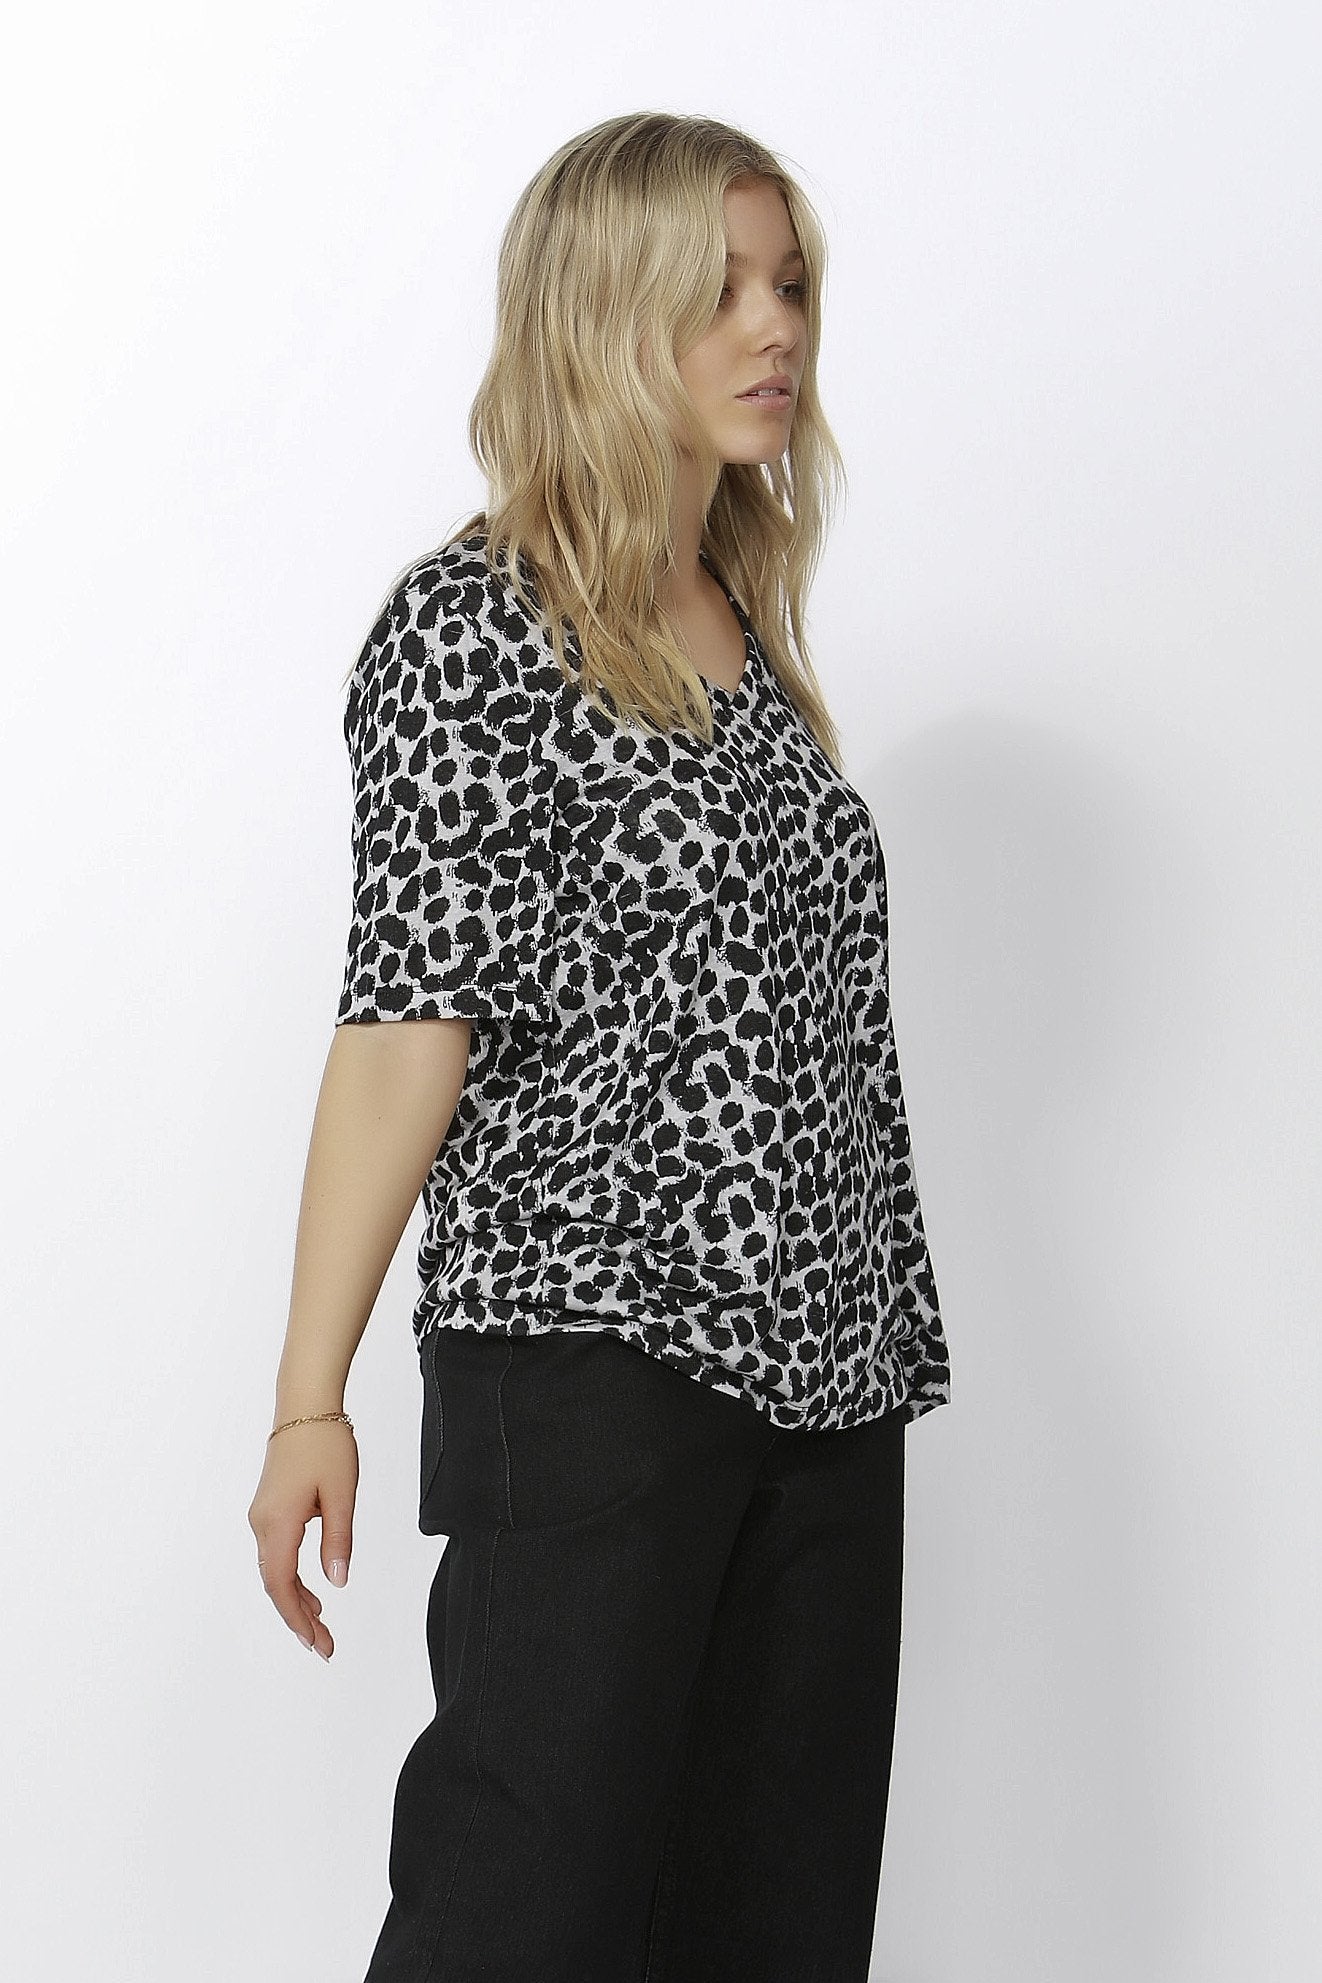 Betty Basics Messina V-Neck Tee in Leopard Print Sizes 6 or 8 Only - Hey Sara